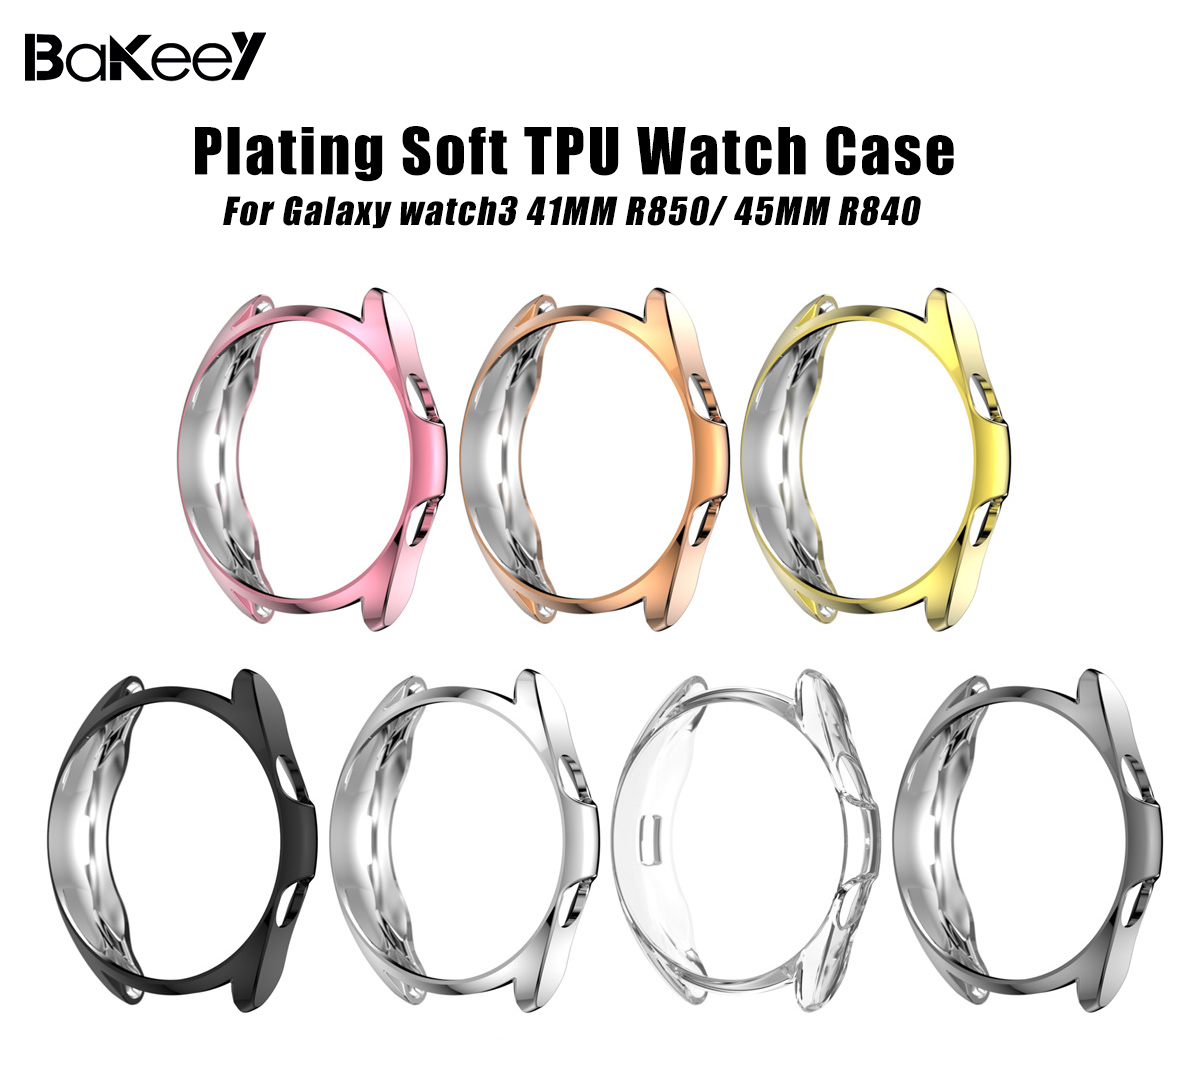 Bakeey-Anti-Scratch-Shockproof-Plating-Soft-TPU-Watch-Case-Cover-for-Samsung-Galaxy-Watch3-41MM-R850-1748632-1